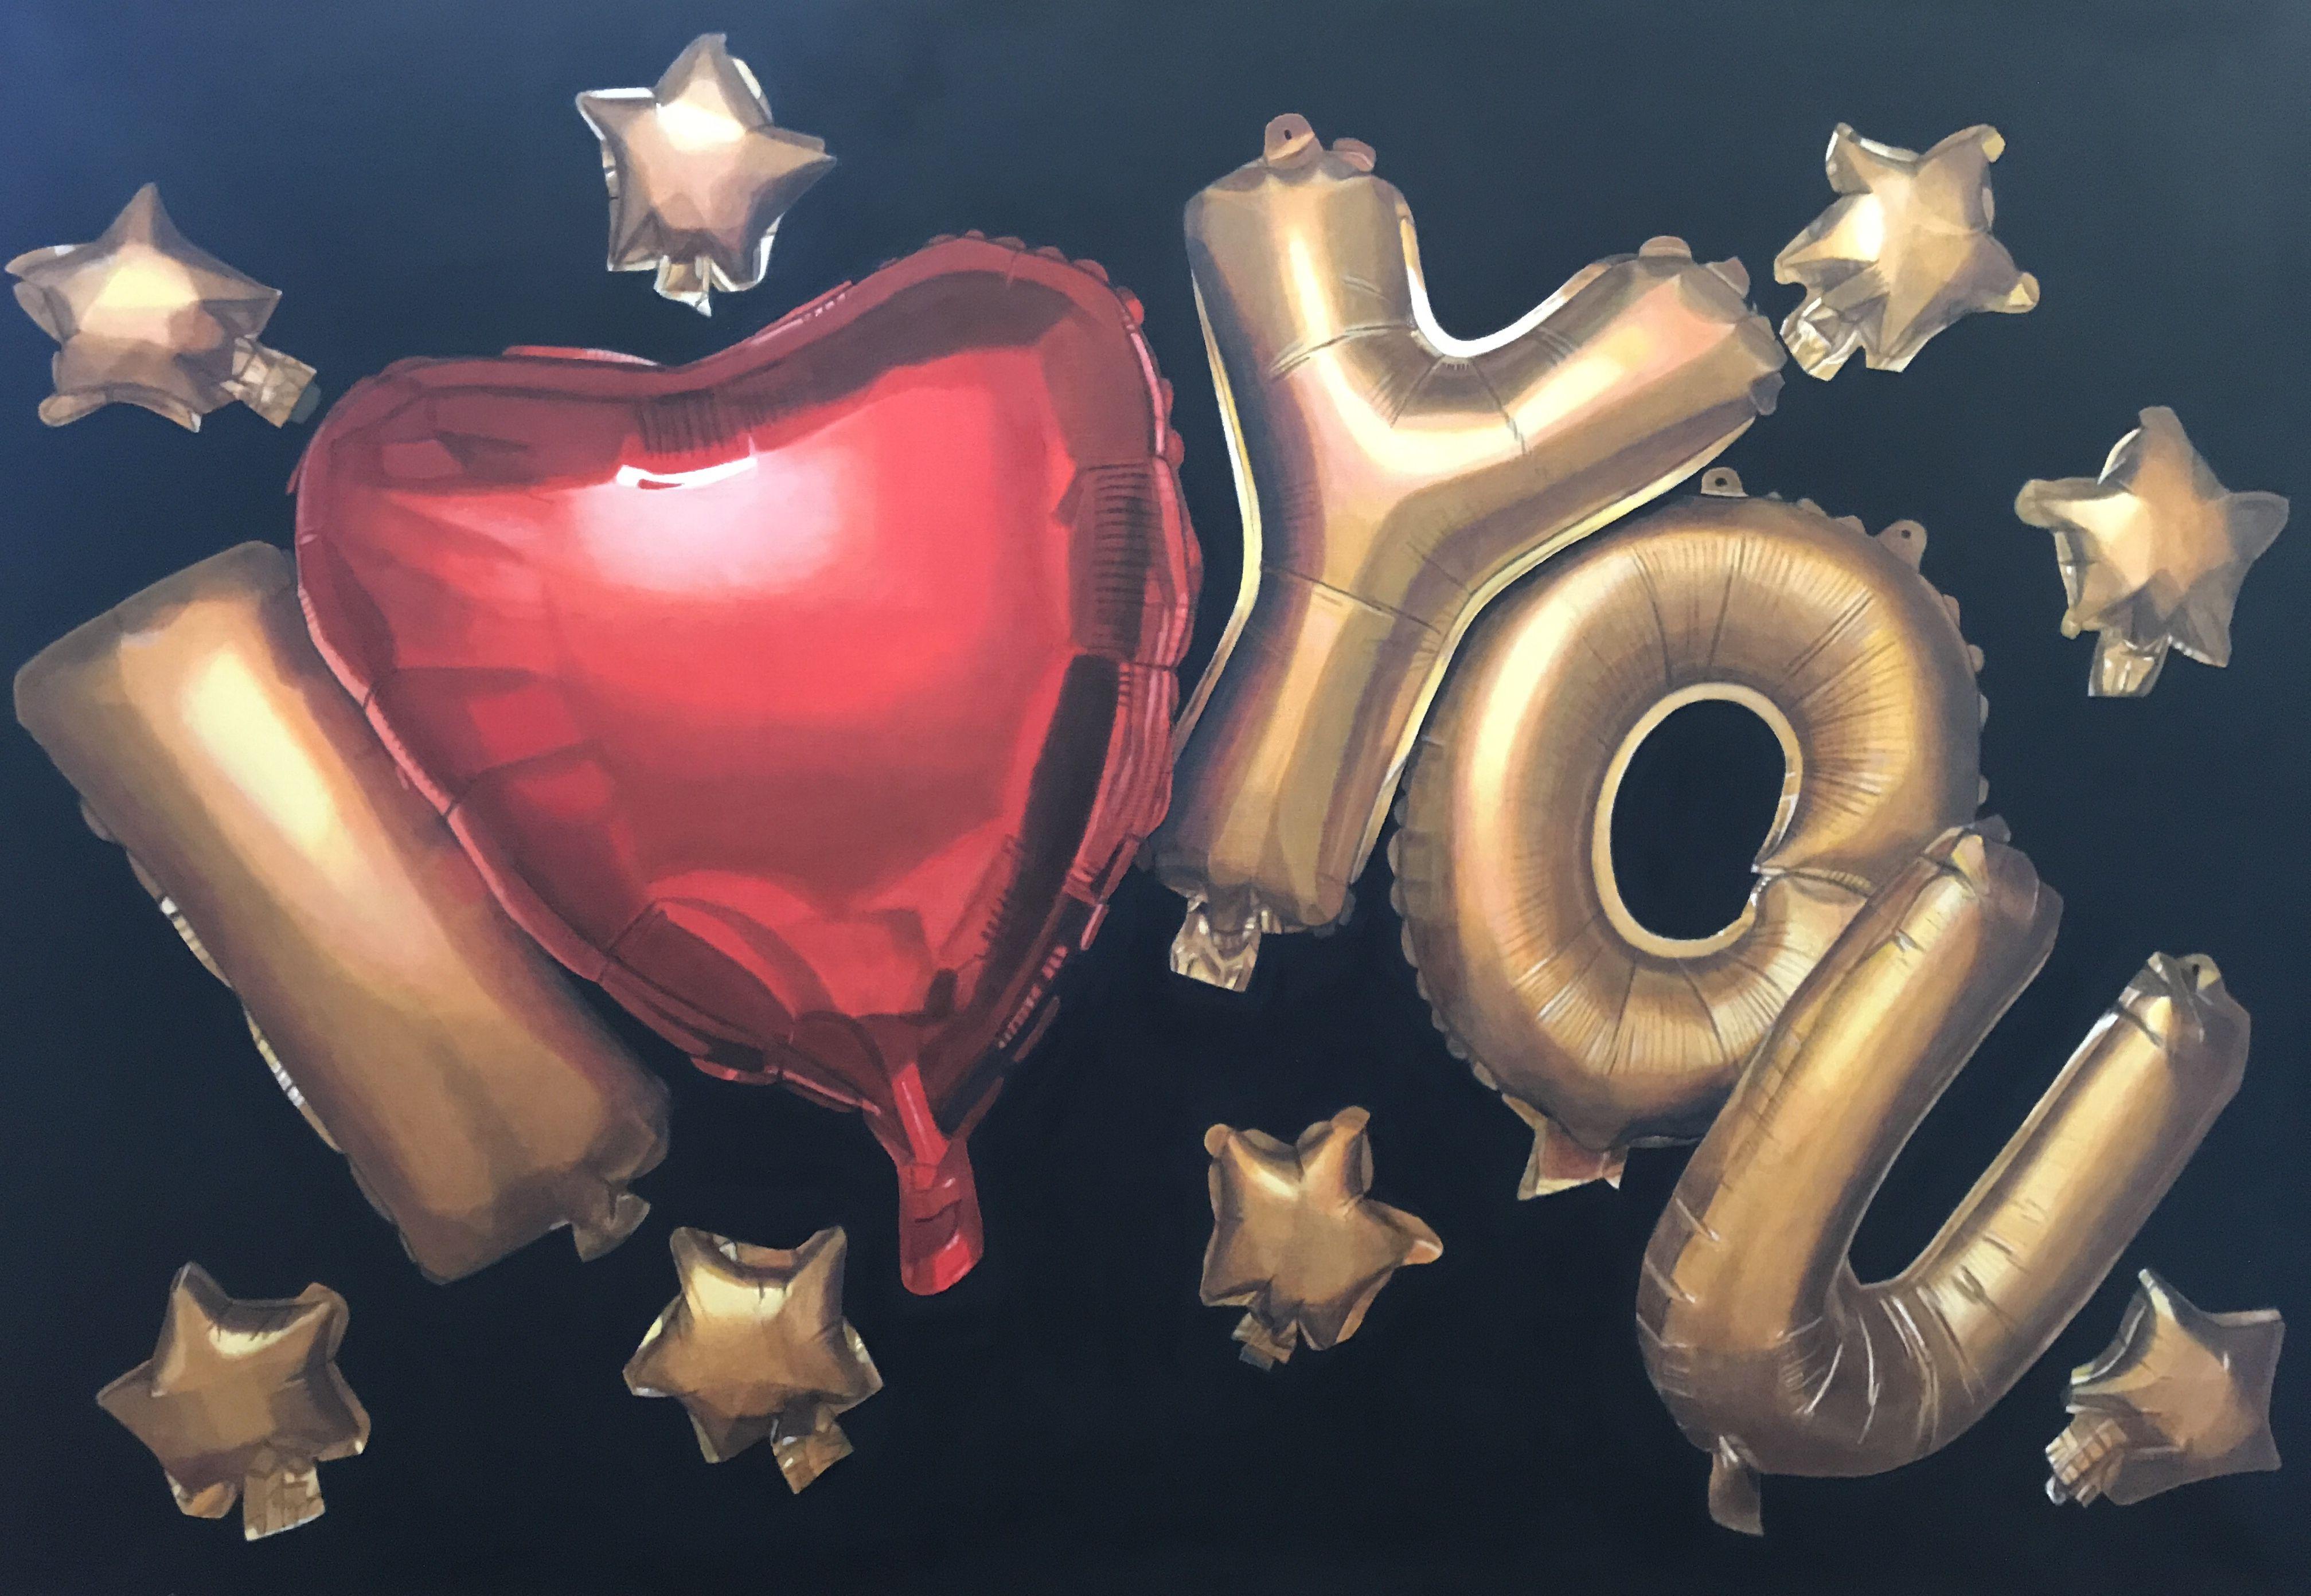 "I LOVE YOU" made with red and gold balloons on a black background. Several layers of paint, using traditionnal tools,  :: Painting :: Photorealism :: This piece comes with an official certificate of authenticity signed by the artist :: Ready to